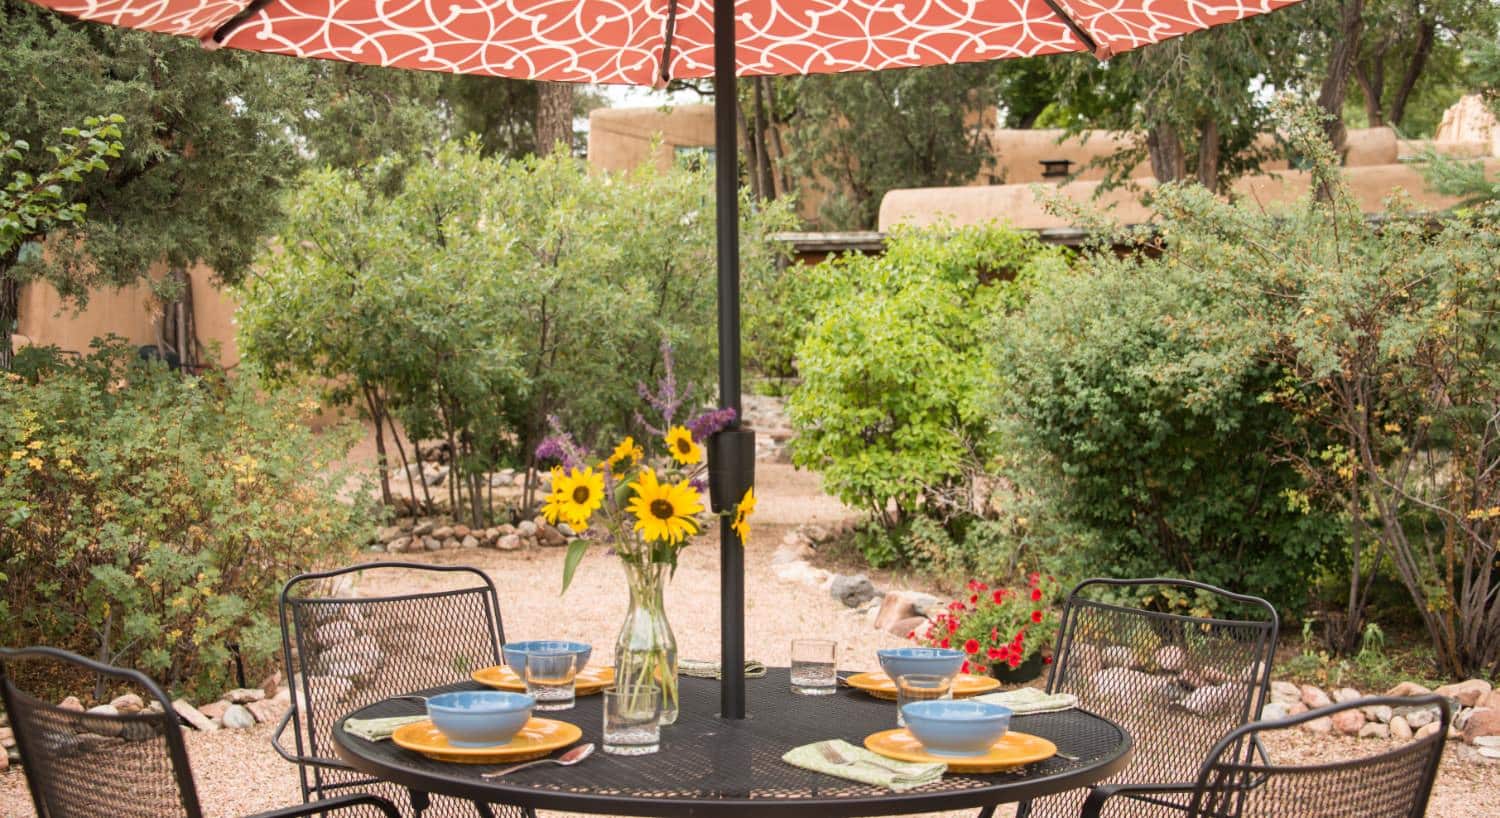 Wrought iron patio table and chairs, blue bowls and orange plates, yellow and purple flowers in a glass vase, and green bushes in the background